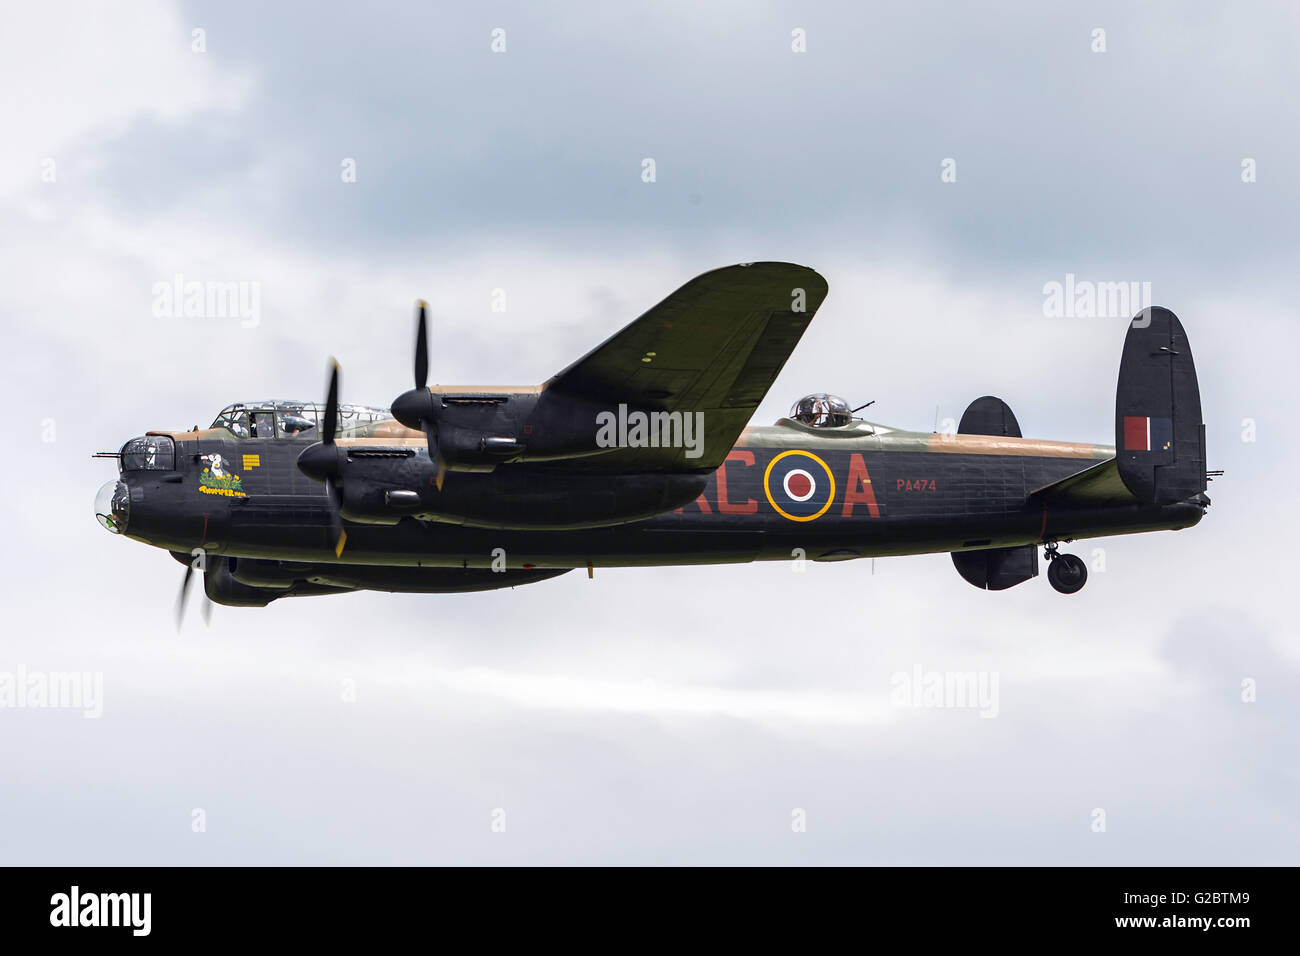 Avro Lancaster World War II heavy bomber from the Royal Air Force Stock  Photo - Alamy